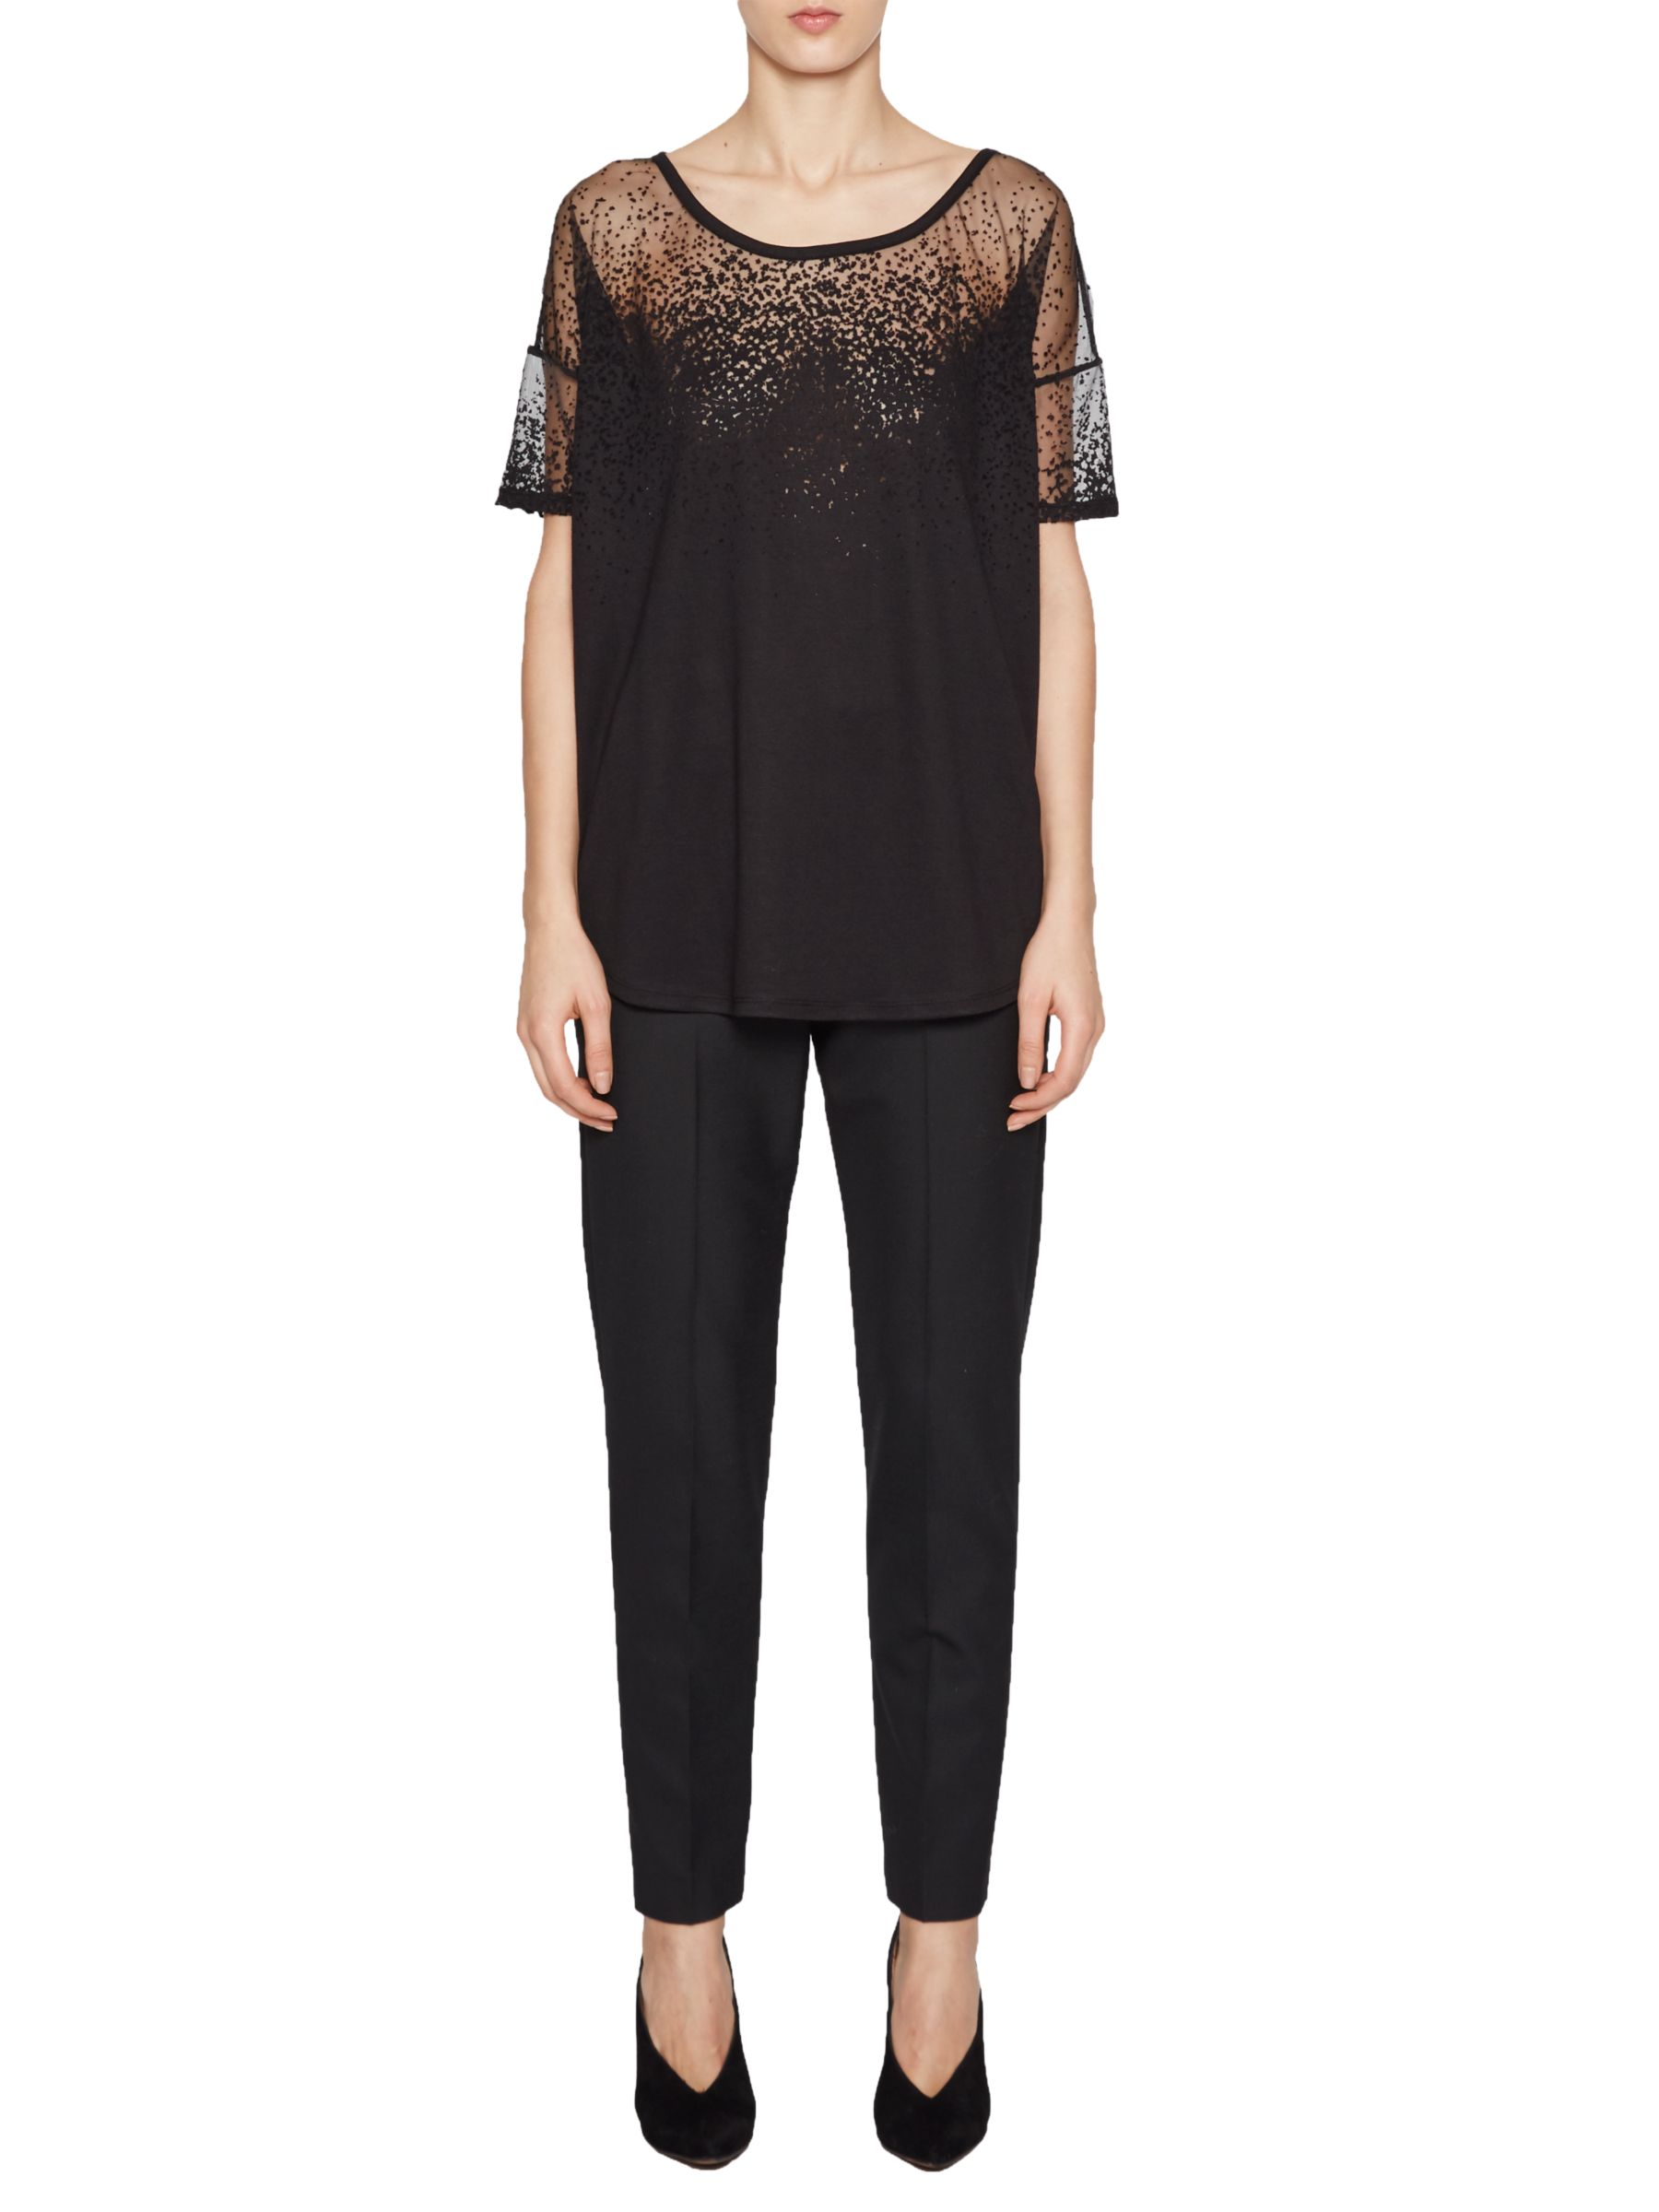 French Connection Sheer Space Jersey Round Neck Top, Black, M